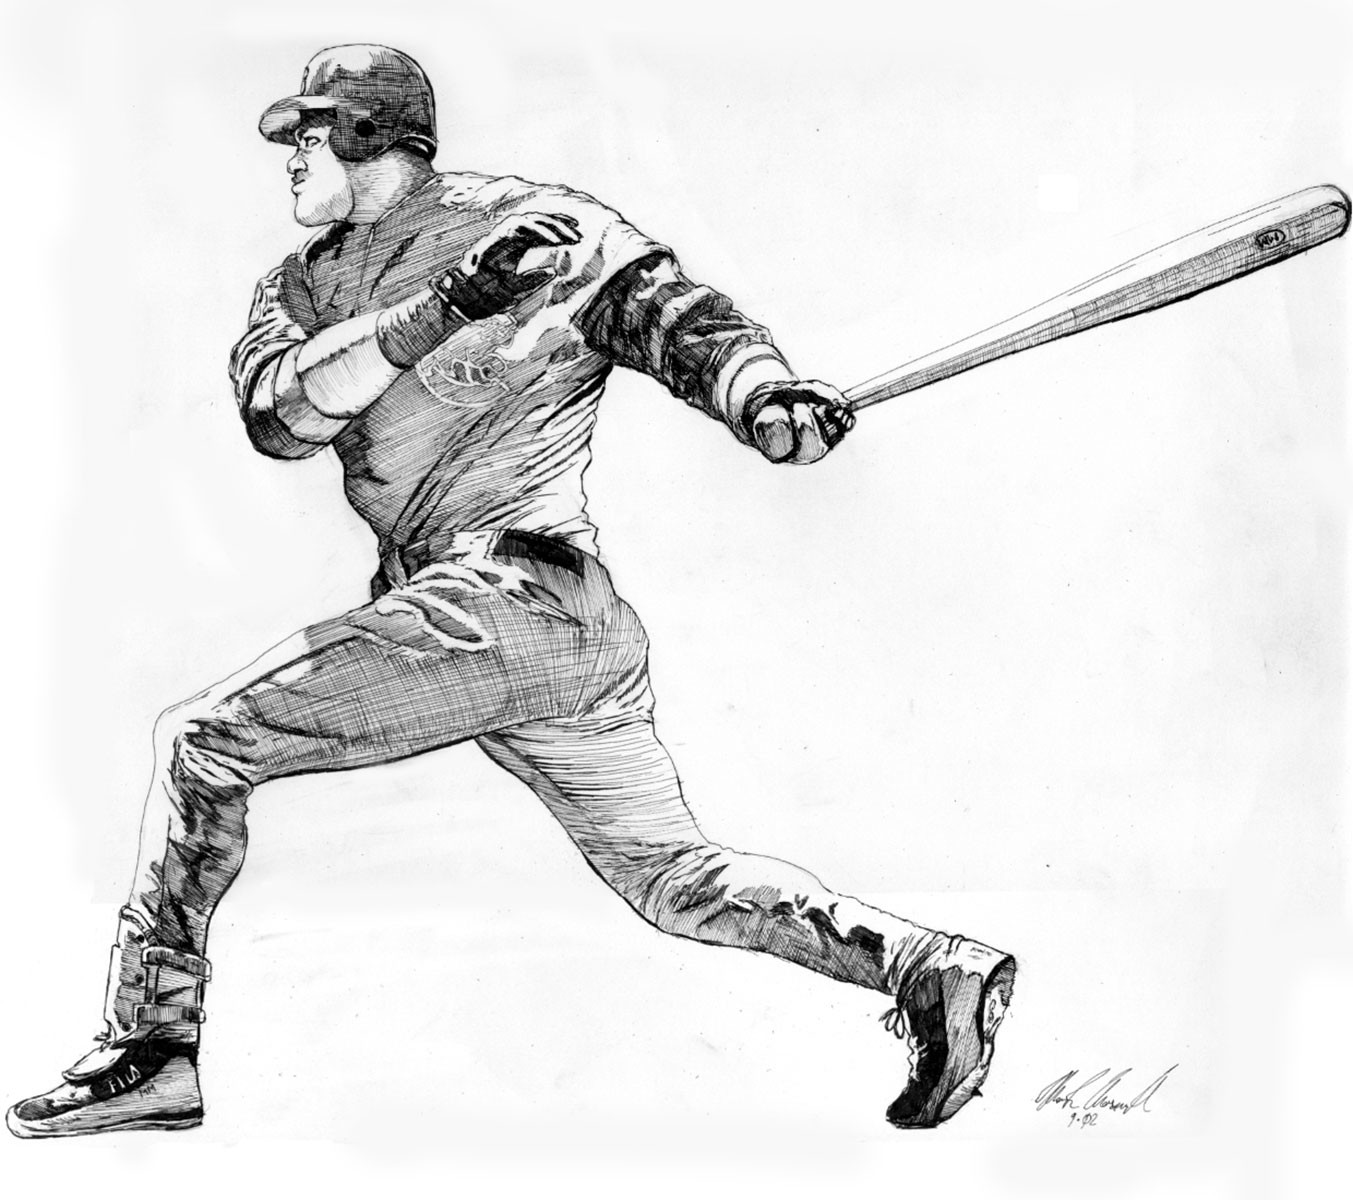 8" x 10" pen and ink drawing of Sammy Sosa of the Chicago Cubs, drawn referencing a photo that appeared in a newspaper spread. 